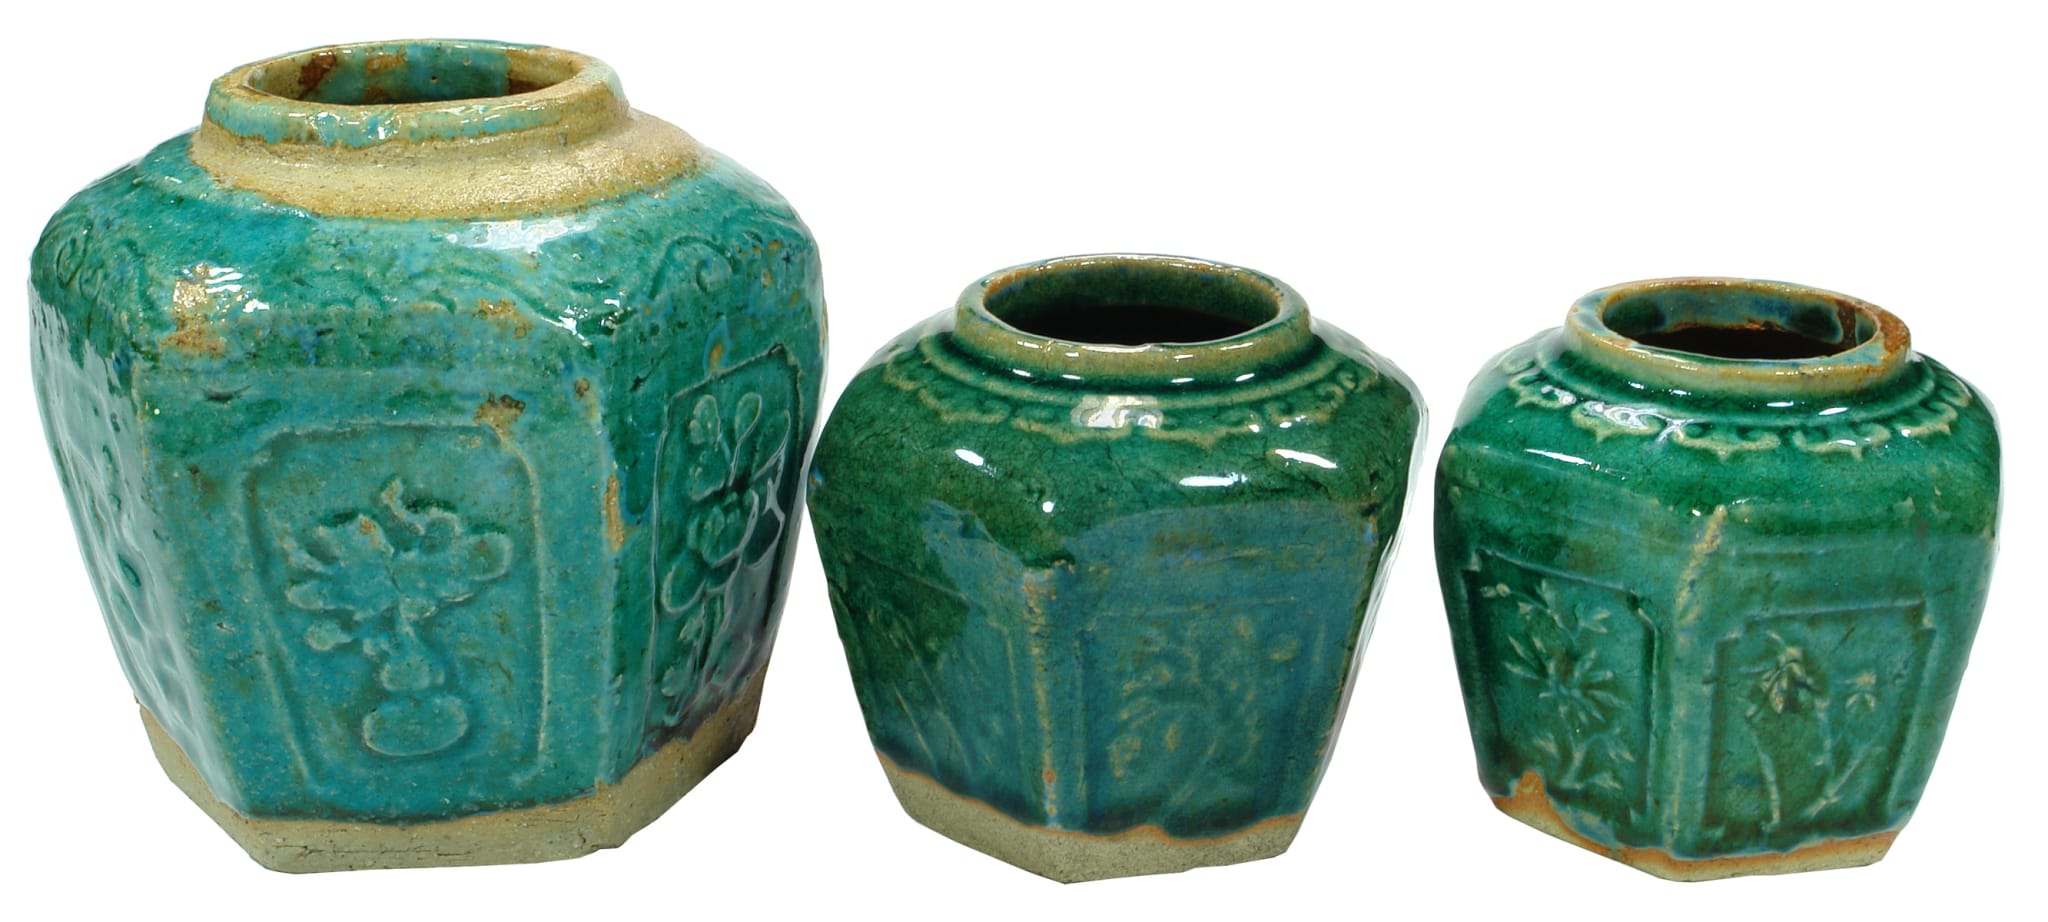 Ceramic Chinese Containers Bottles